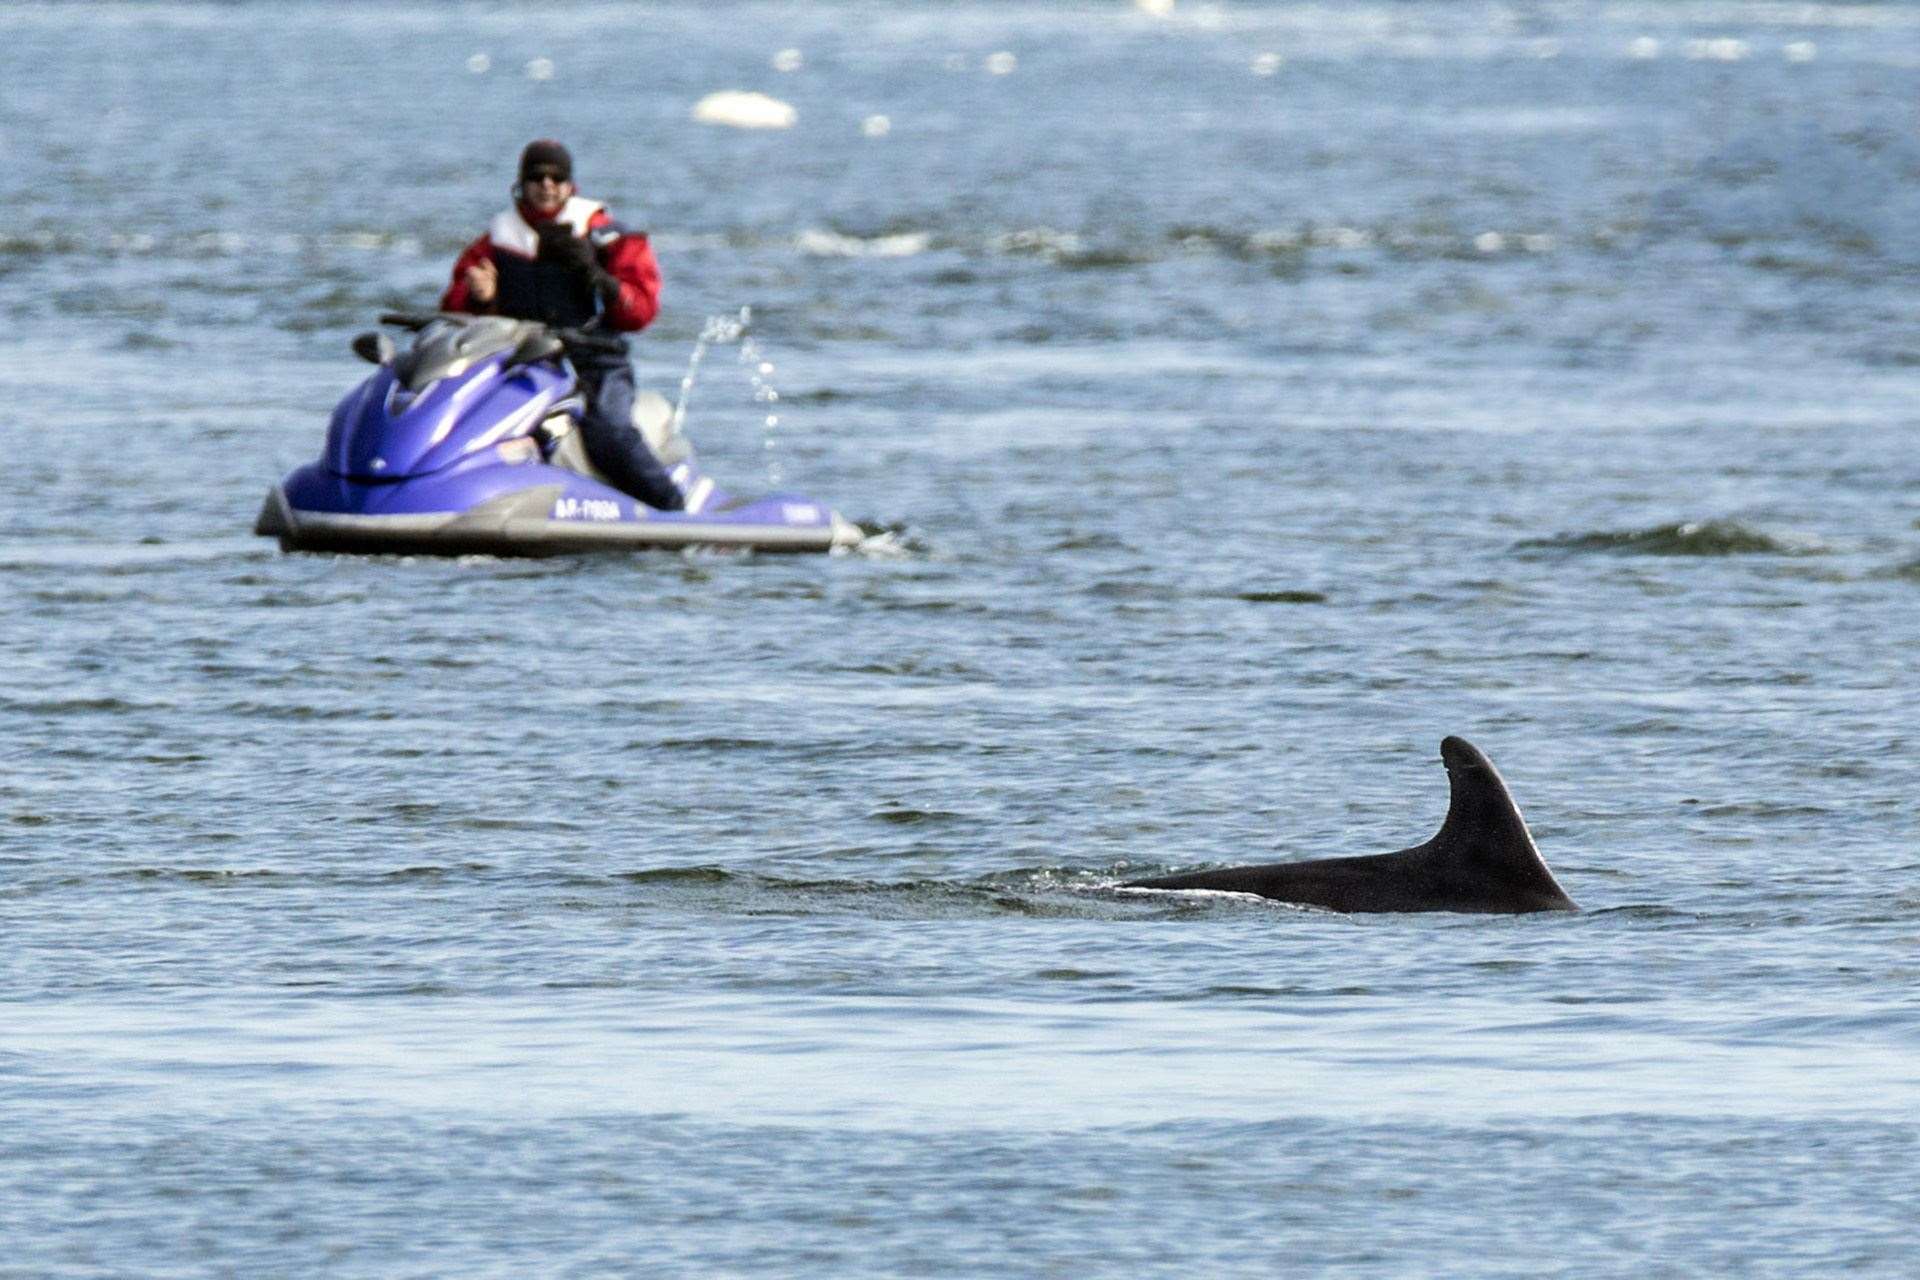 Jet skiiers and other water users could face legal action if they hard marine wildlife.